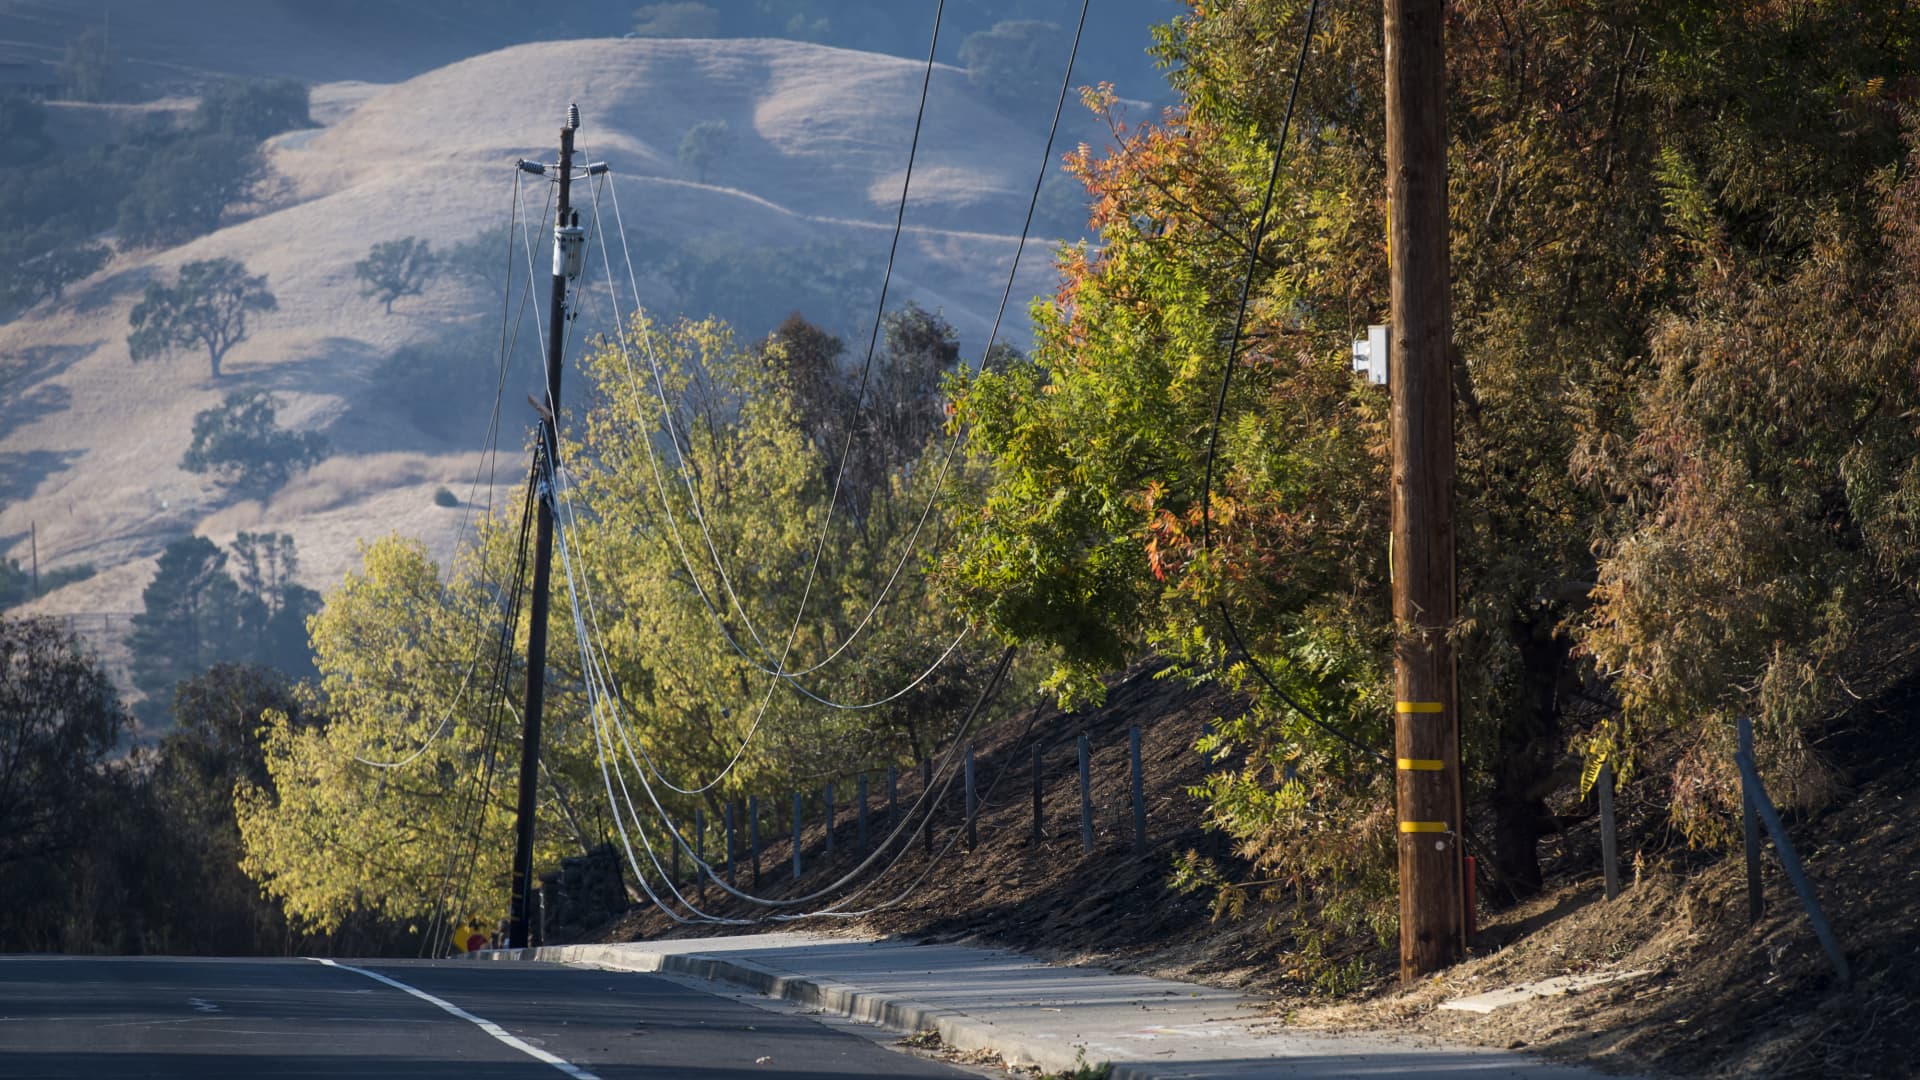 Fallen power lines touch the ground on Camino Diablo road in Lafayette, California, U.S., on Monday, Oct. 28, 2019.